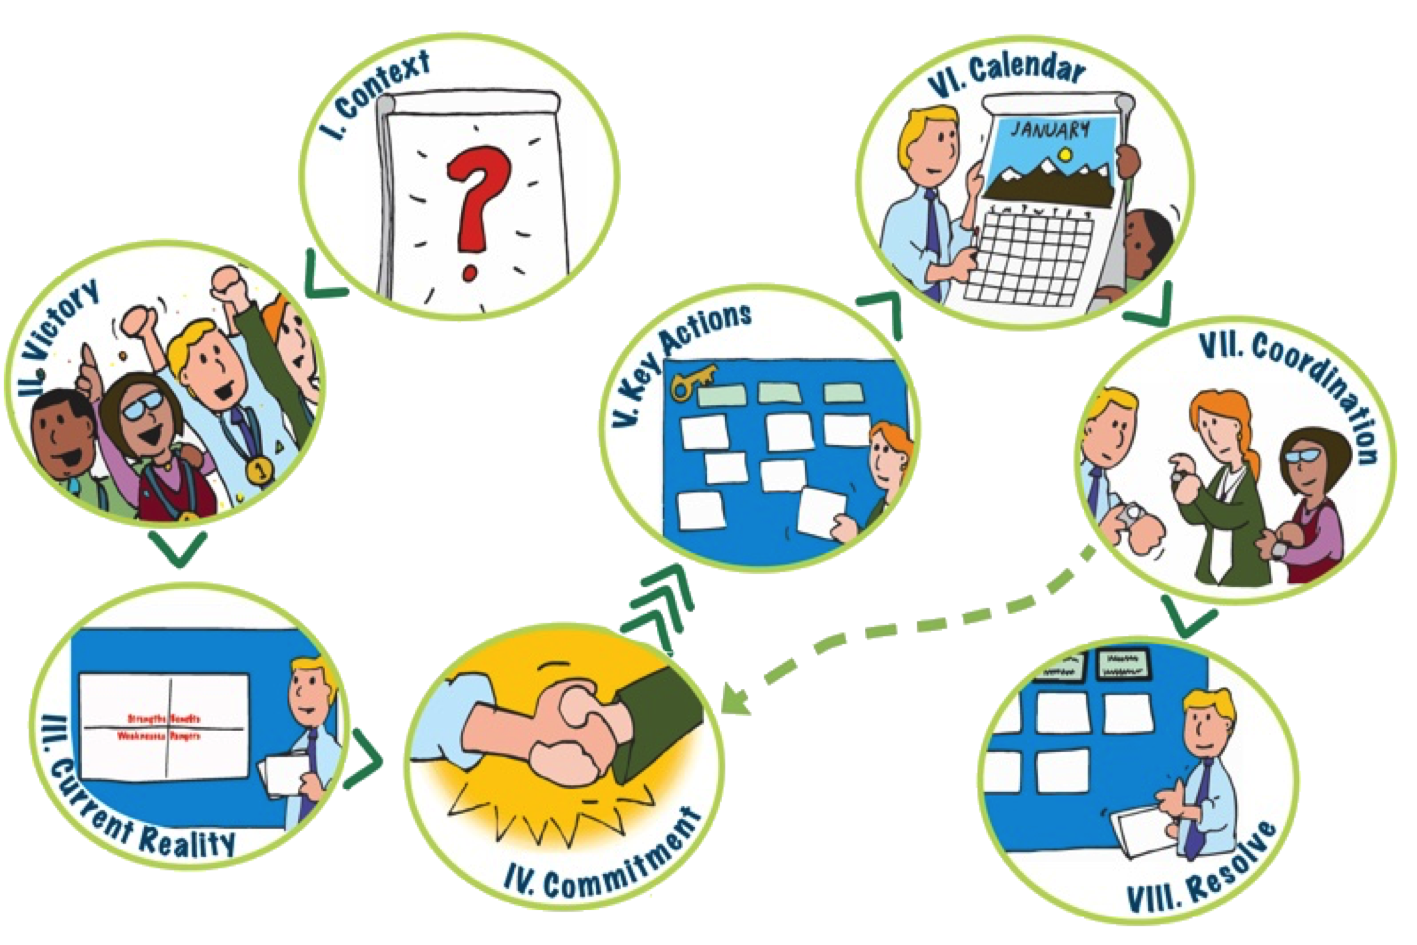 The 8 steps of action planning image